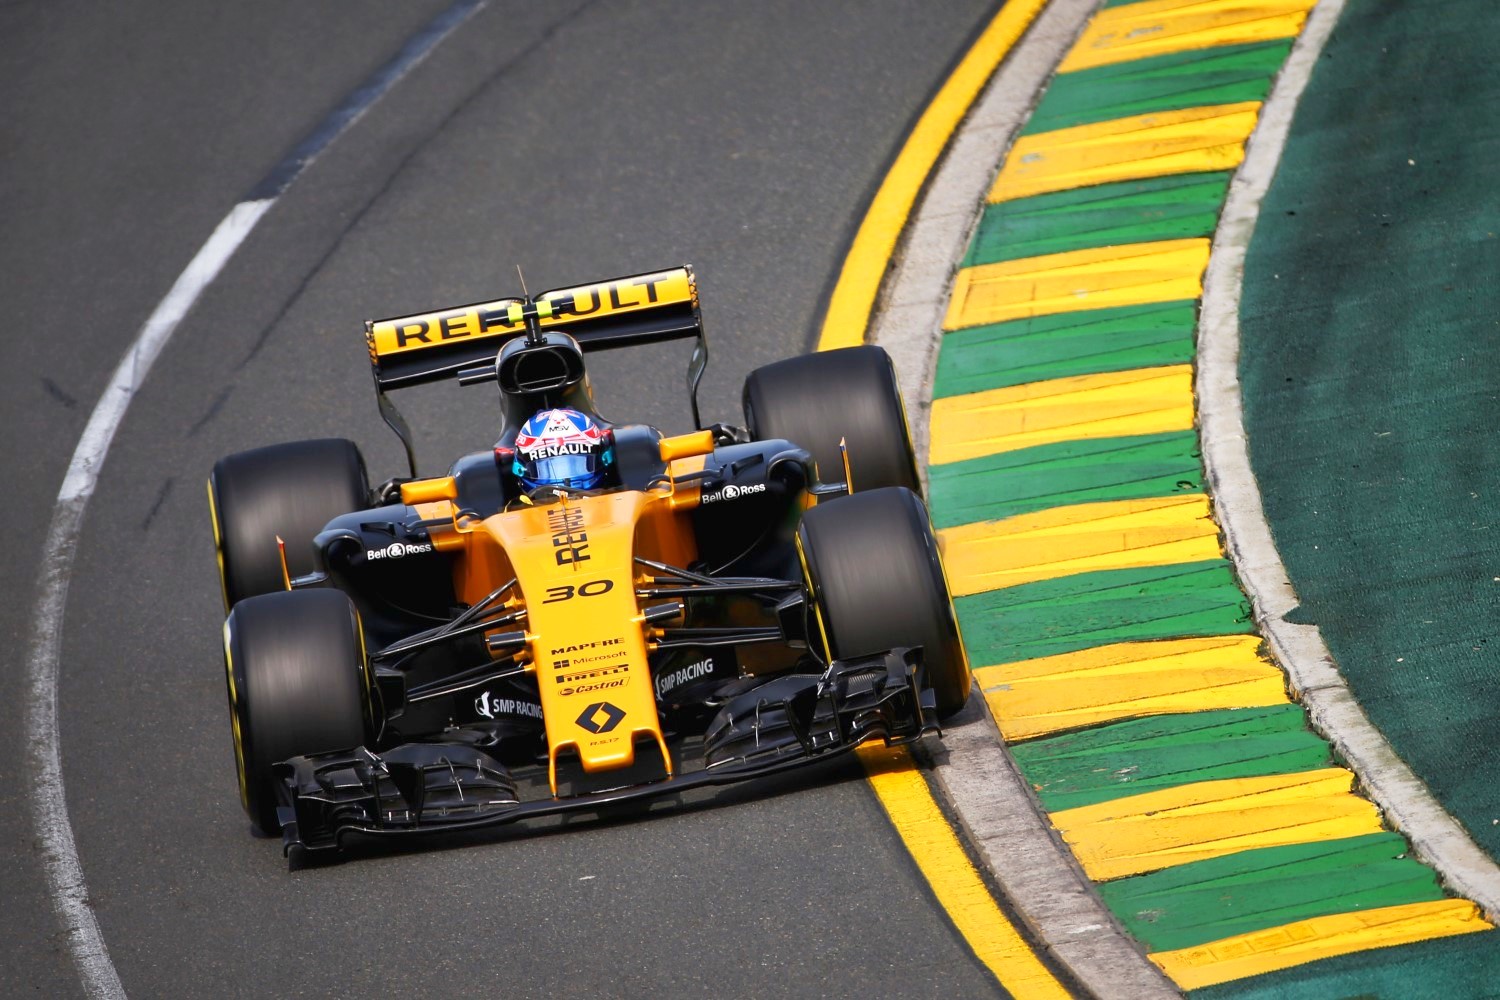 The Renault is coming on strong and Alonso has taken notice